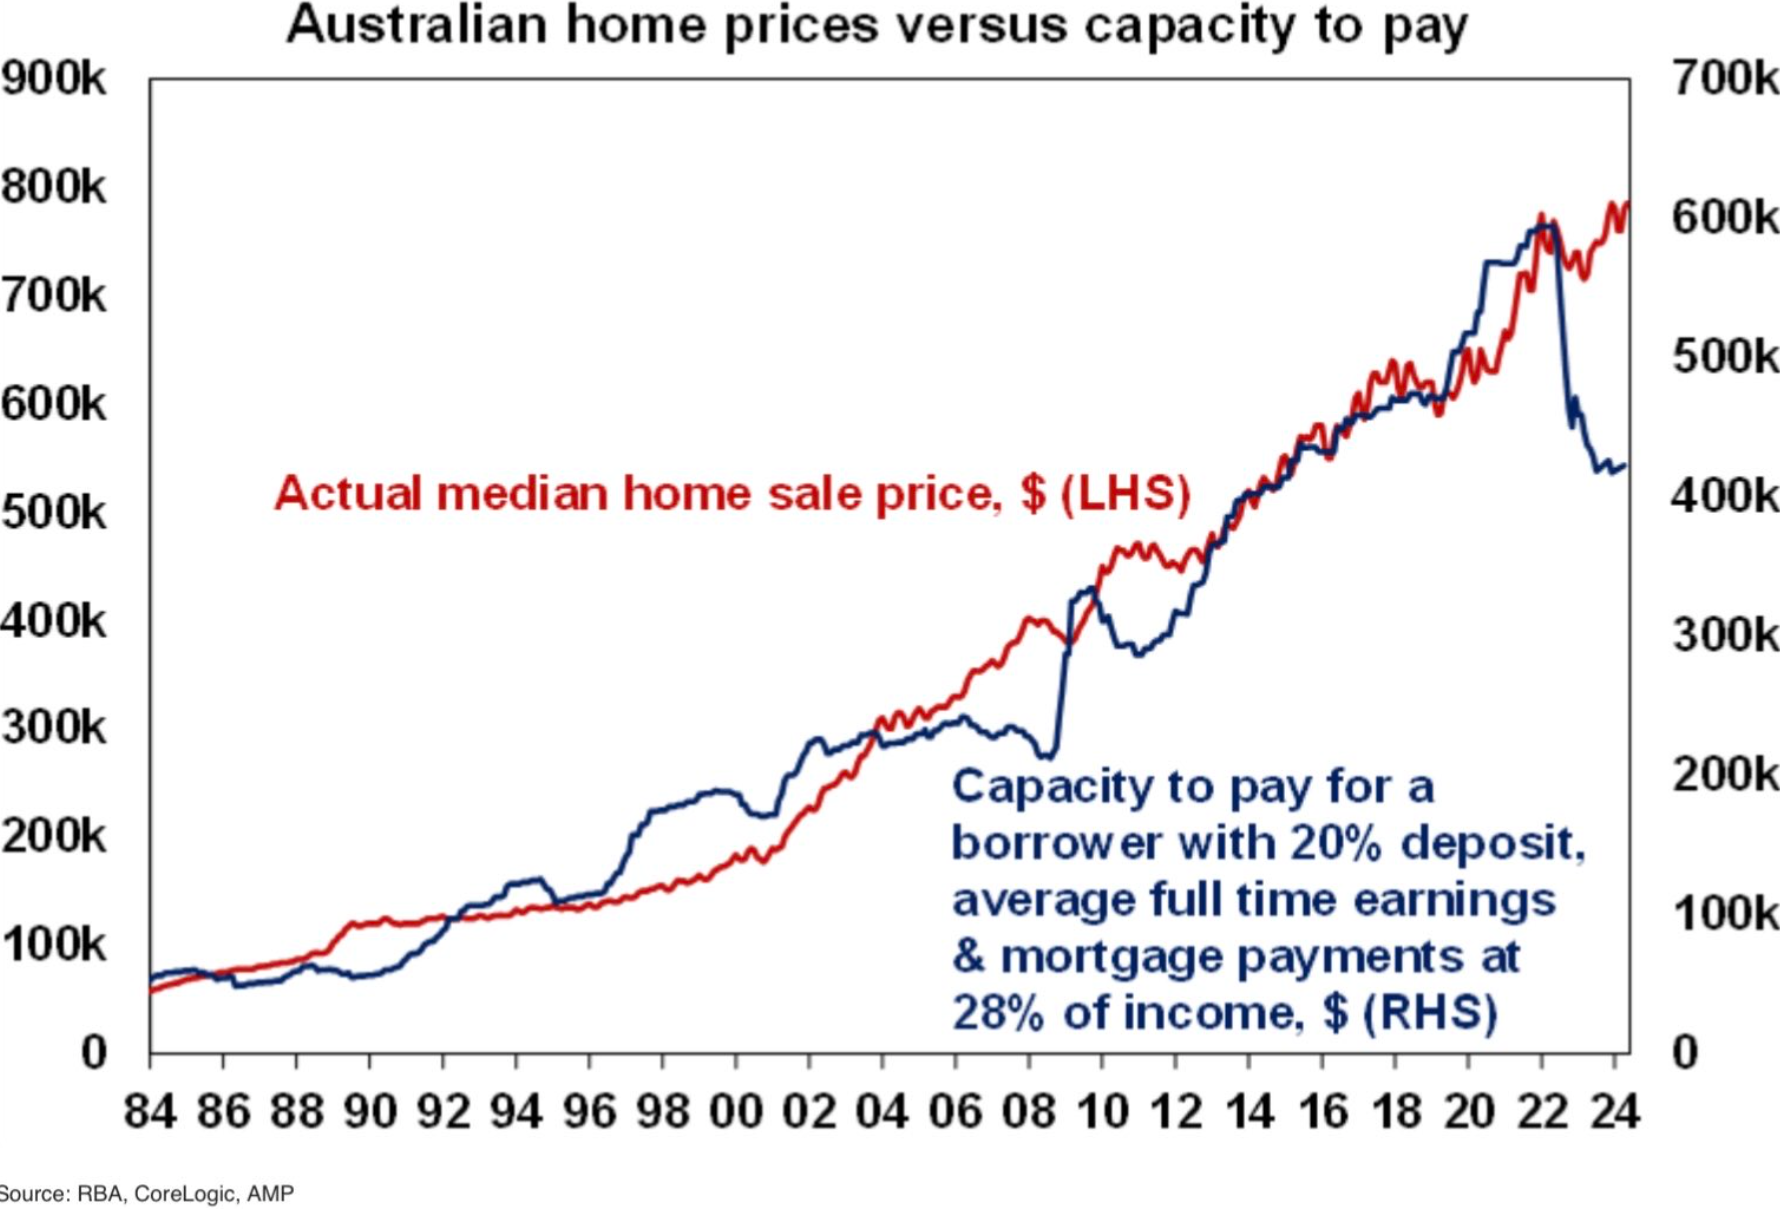 Home prices versus capacity to pay